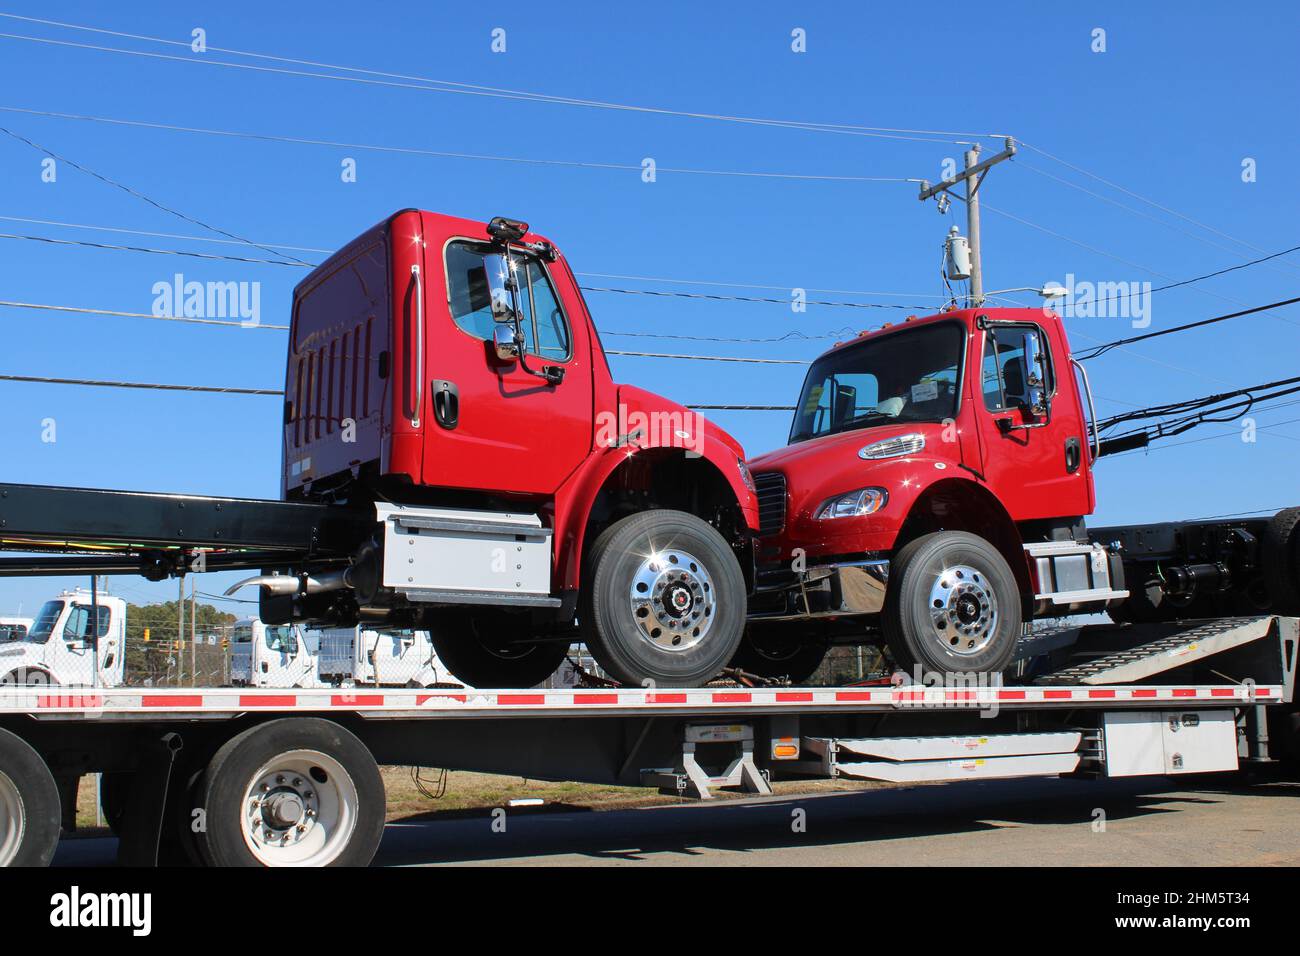 Two red trucks on flat bed truck Stock Photo